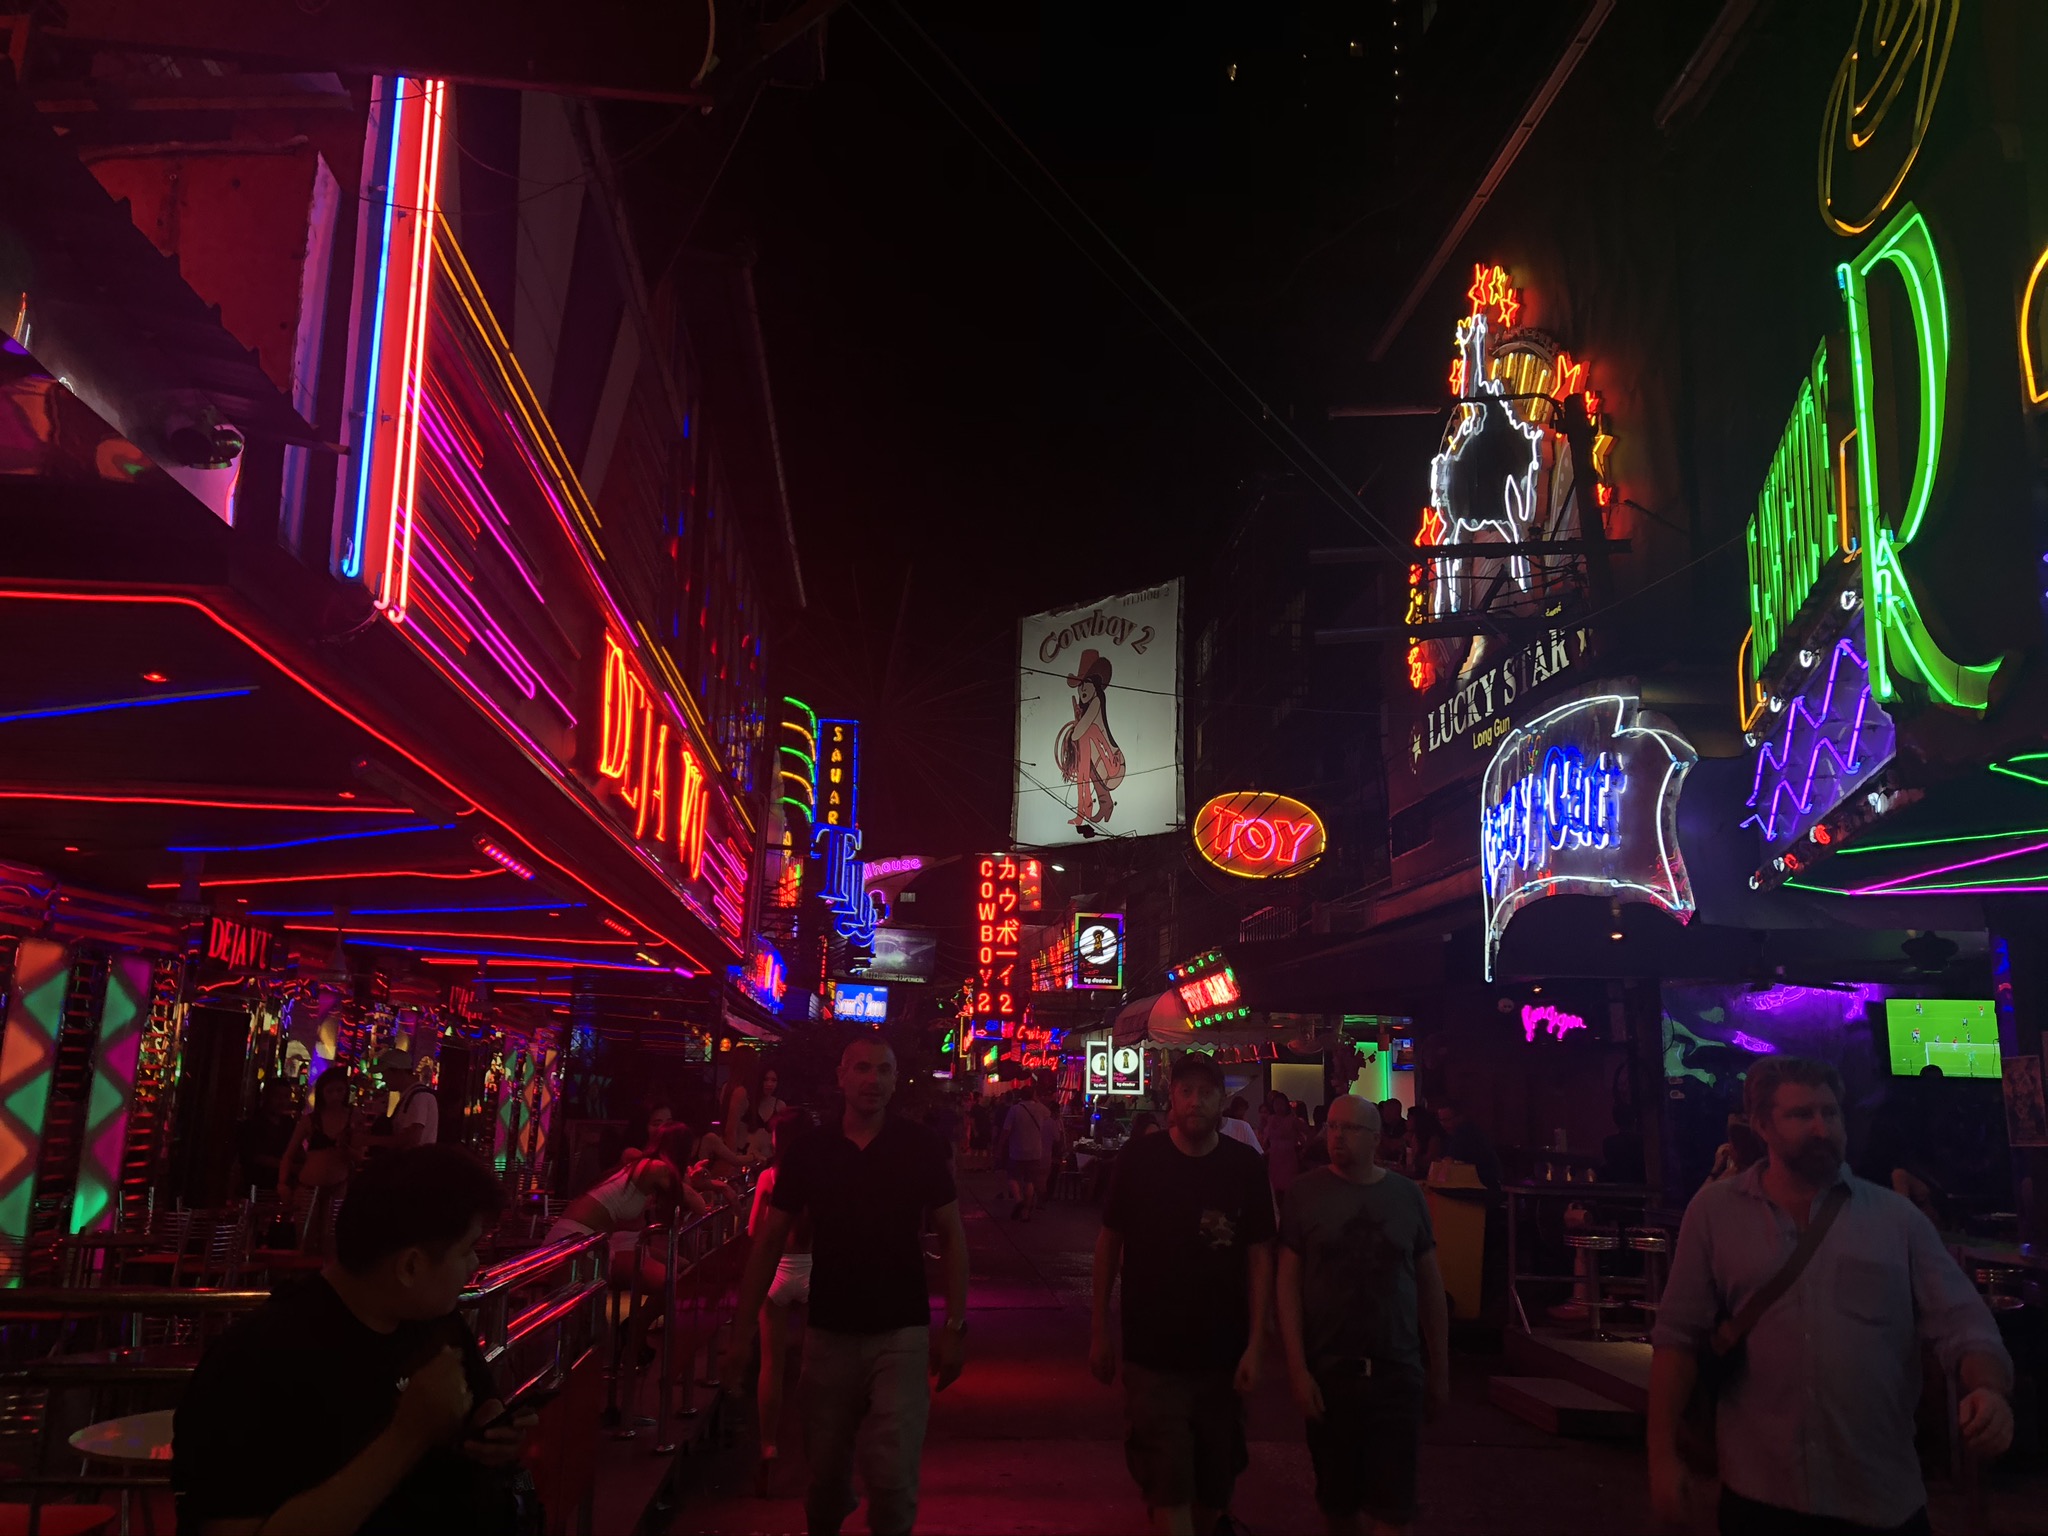 Picture of Soi Cowboy street at night — neon lights, tourists